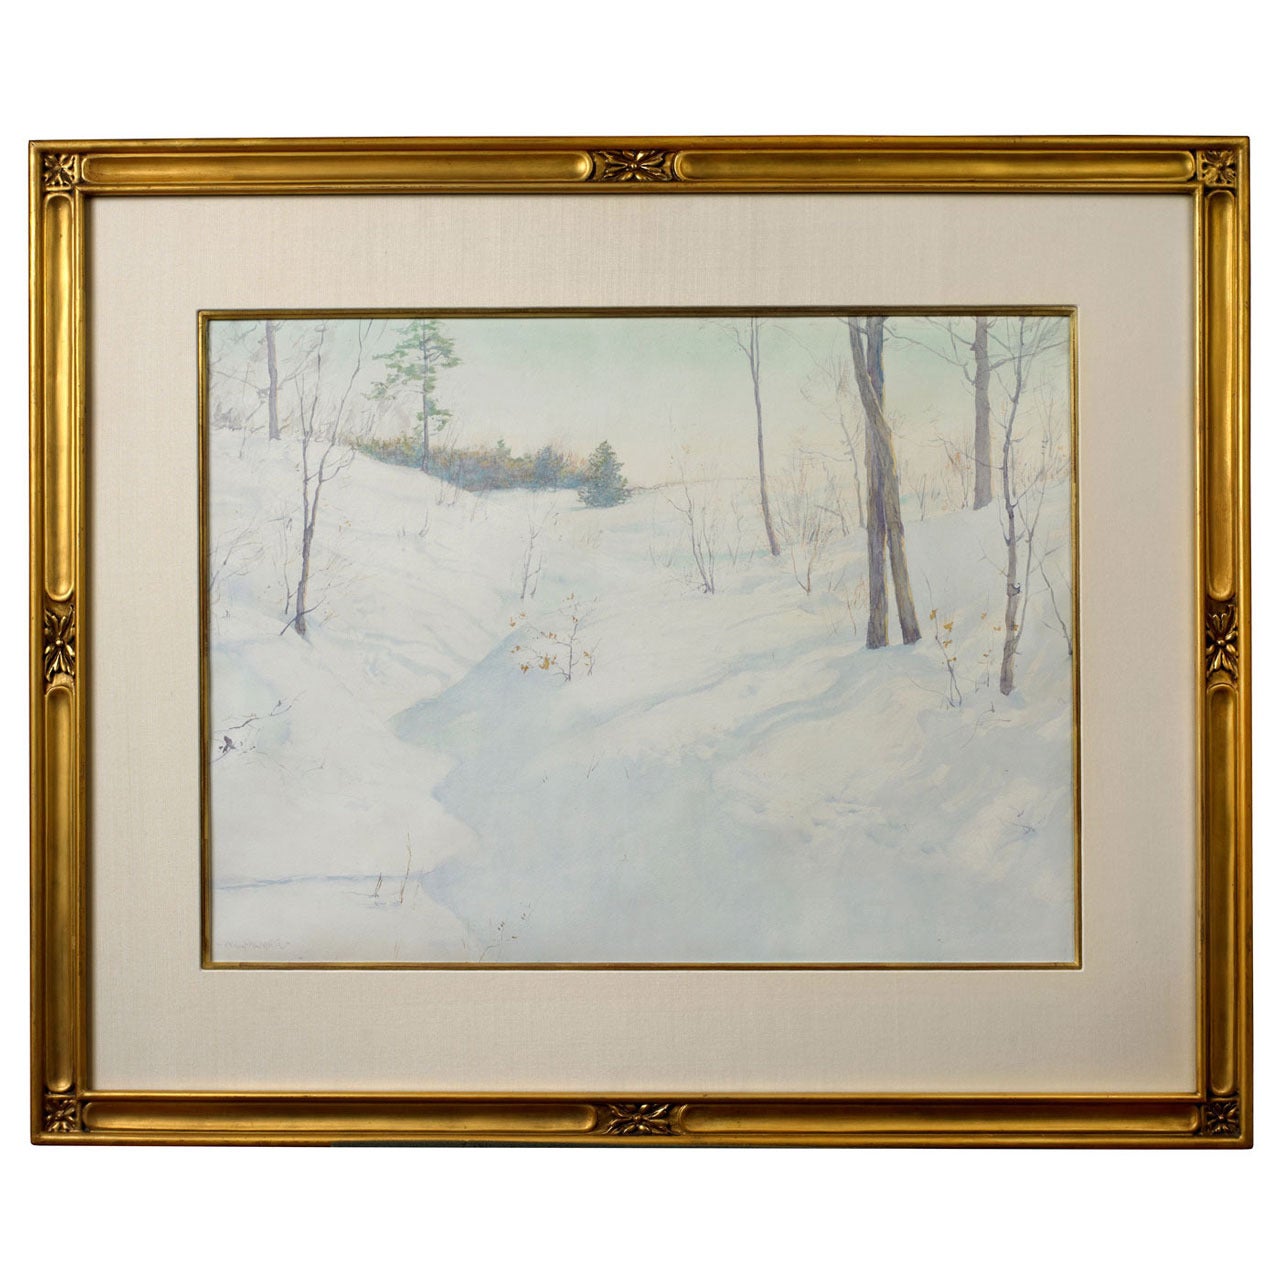 Walter Launt Palmer "Snowy Landscape" Painting For Sale